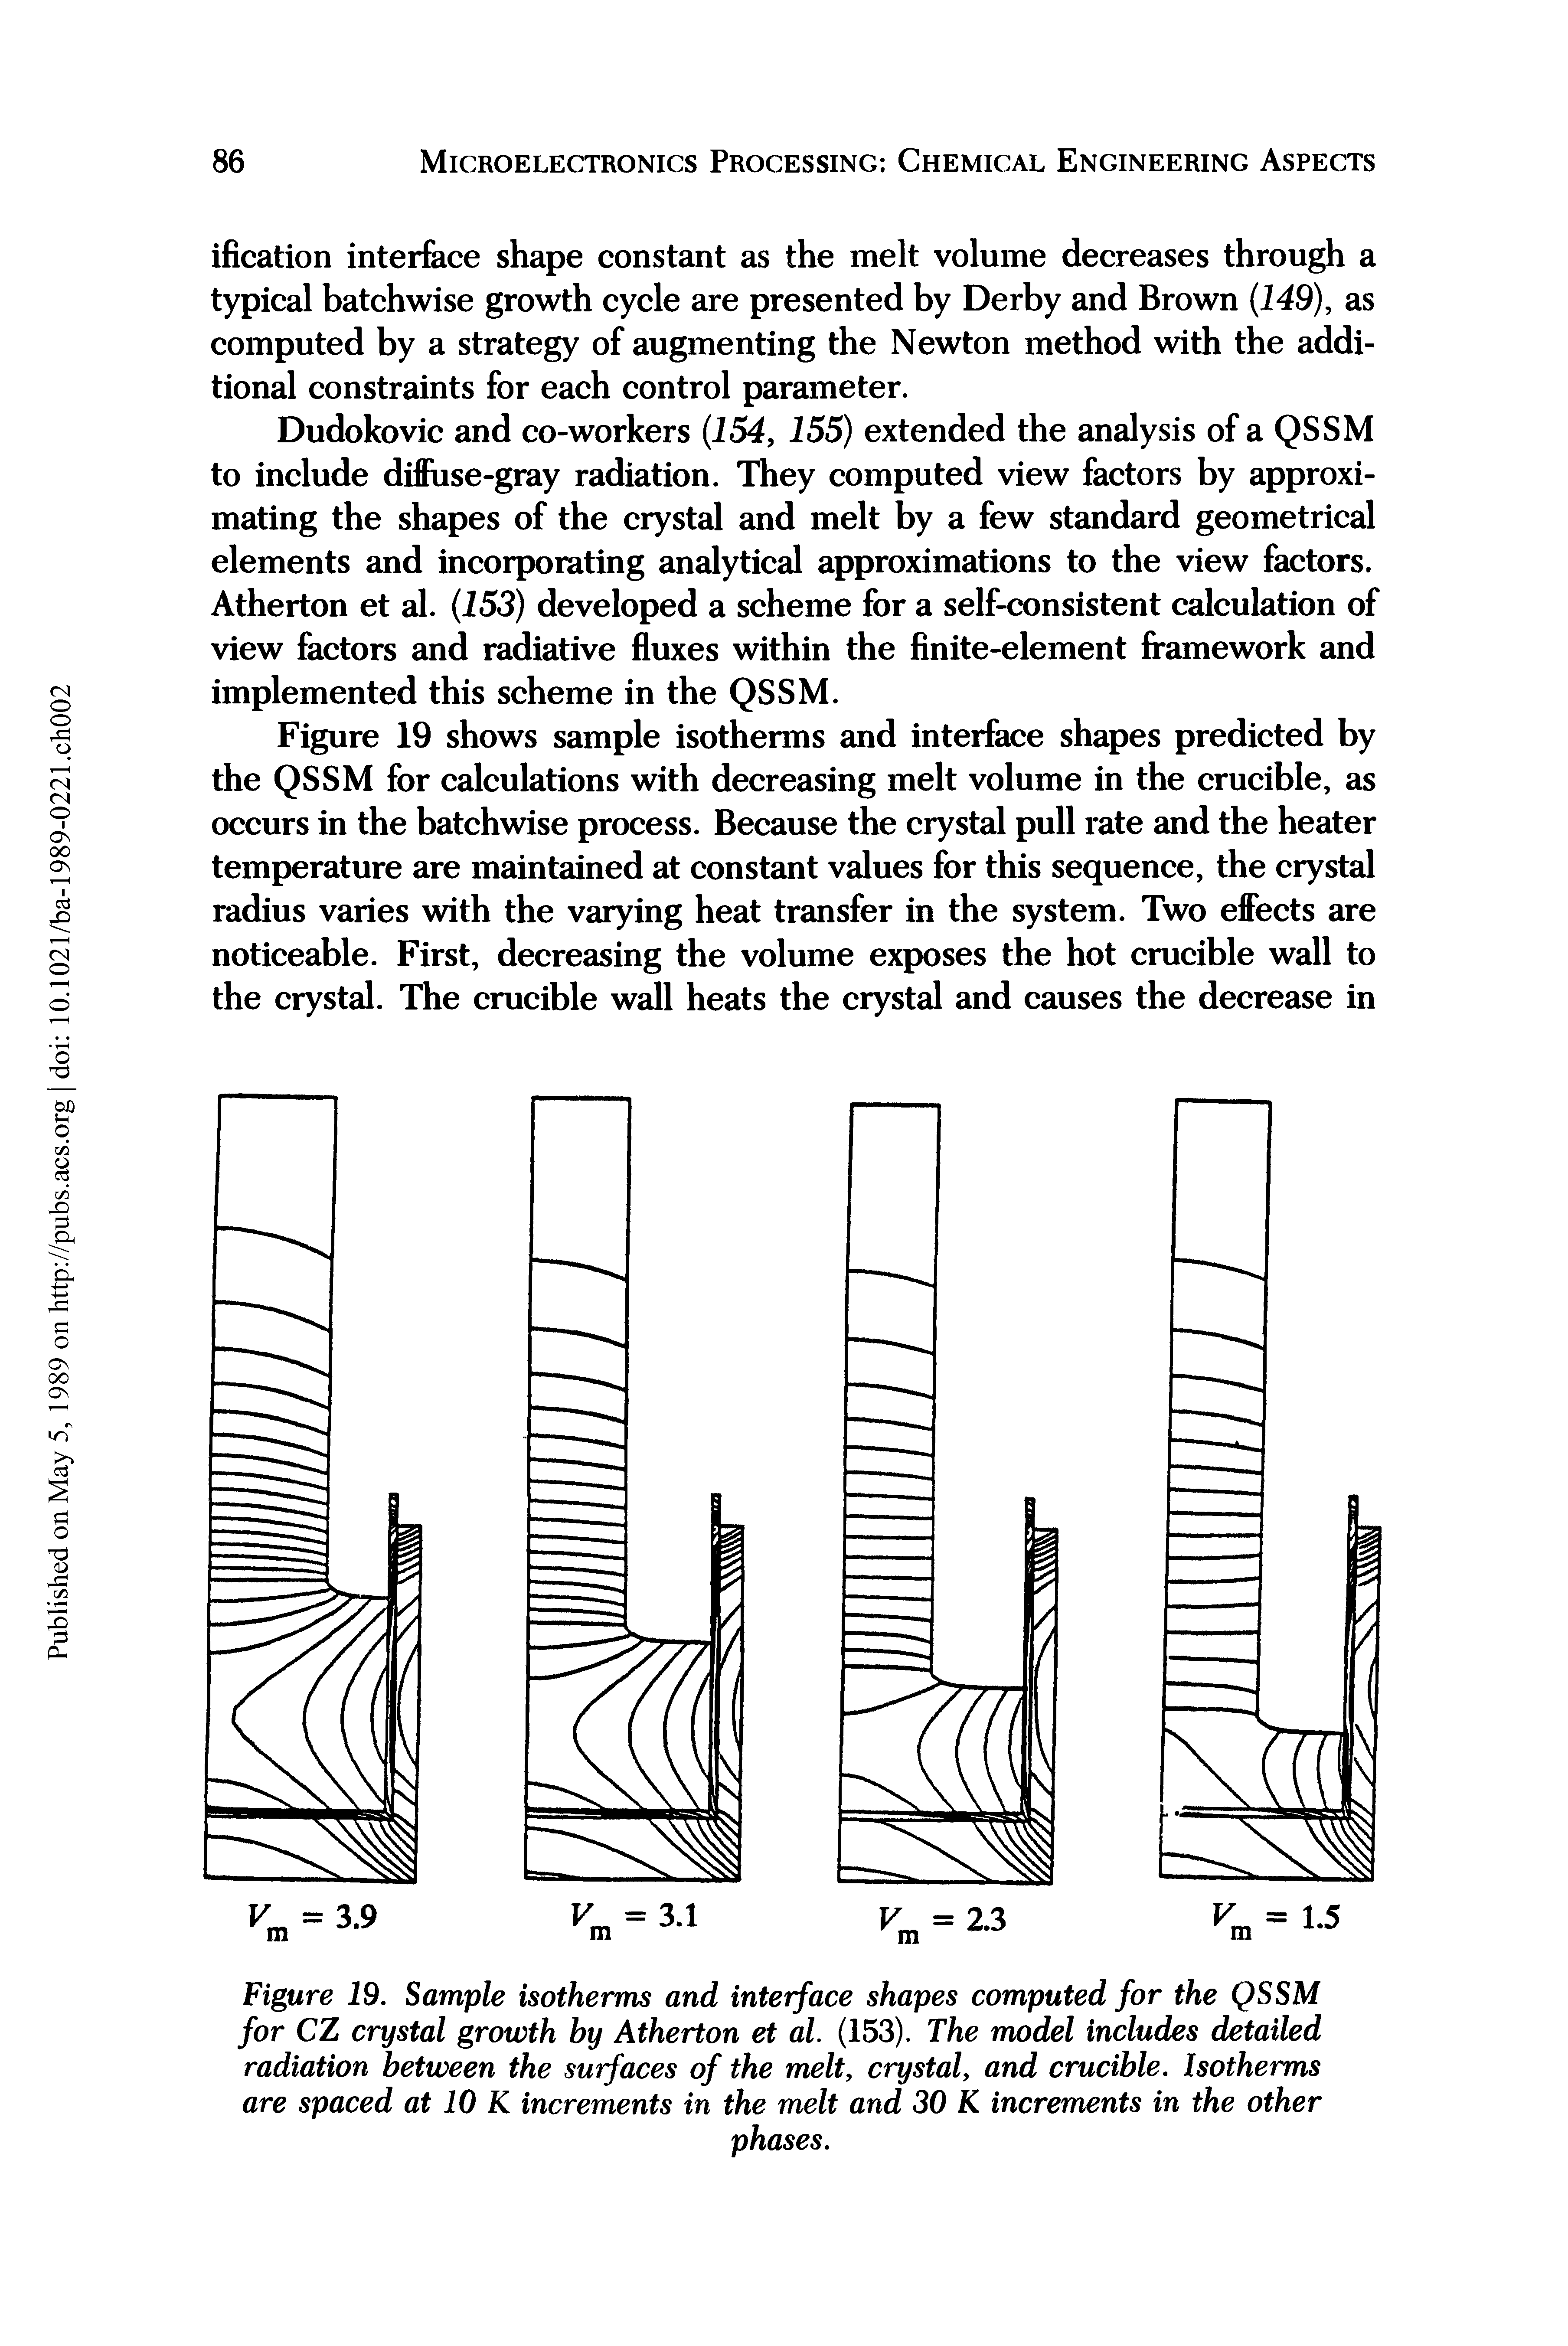 Figure 19. Sample isotherms and interface shapes computed for the QSSM for CZ crystal growth by Atherton et al. (153). The model includes detailed radiation between the surfaces of the melt, crystal, and crucible. Isotherms are spaced at 10 K increments in the melt and 30 K increments in the other...